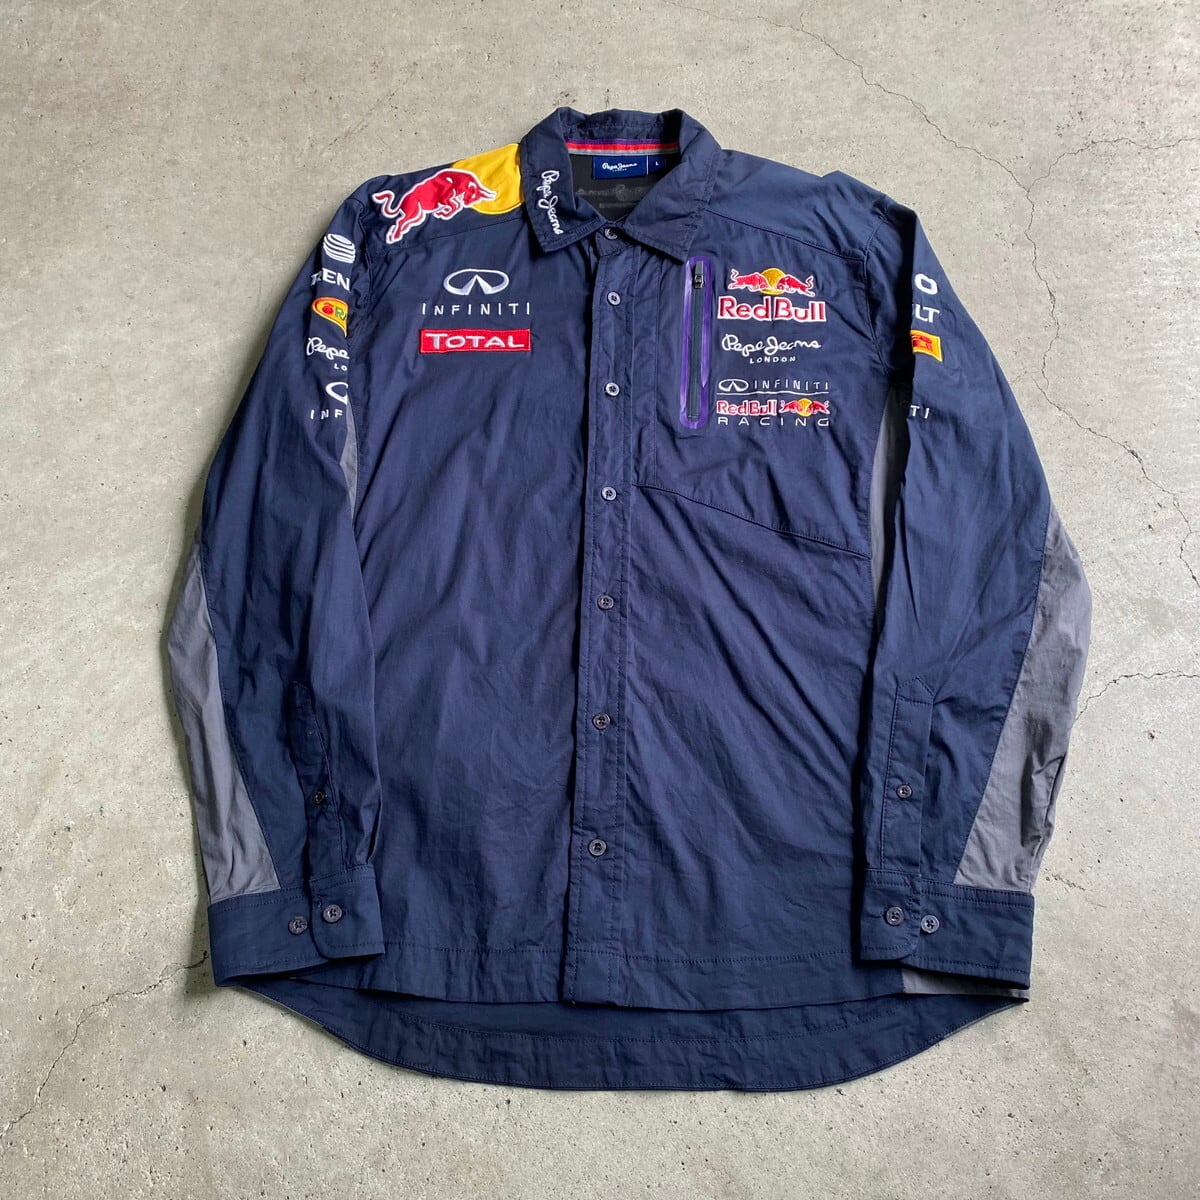 Pepe jeans Red bull ジップアップパーカー S